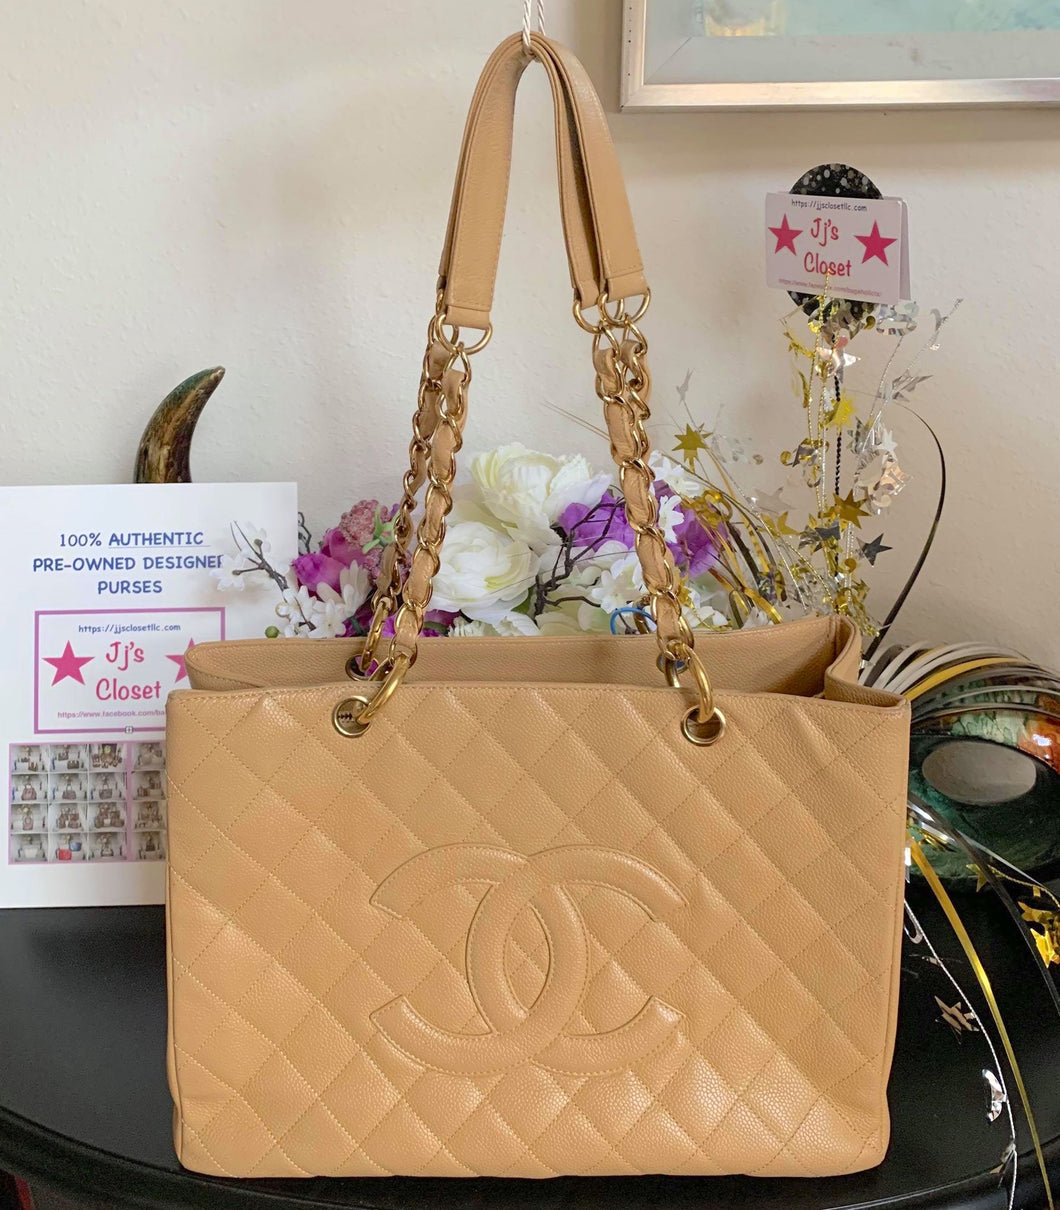 Shop Authentic, Pre-Owned Dream Handbags and More at Keeks This